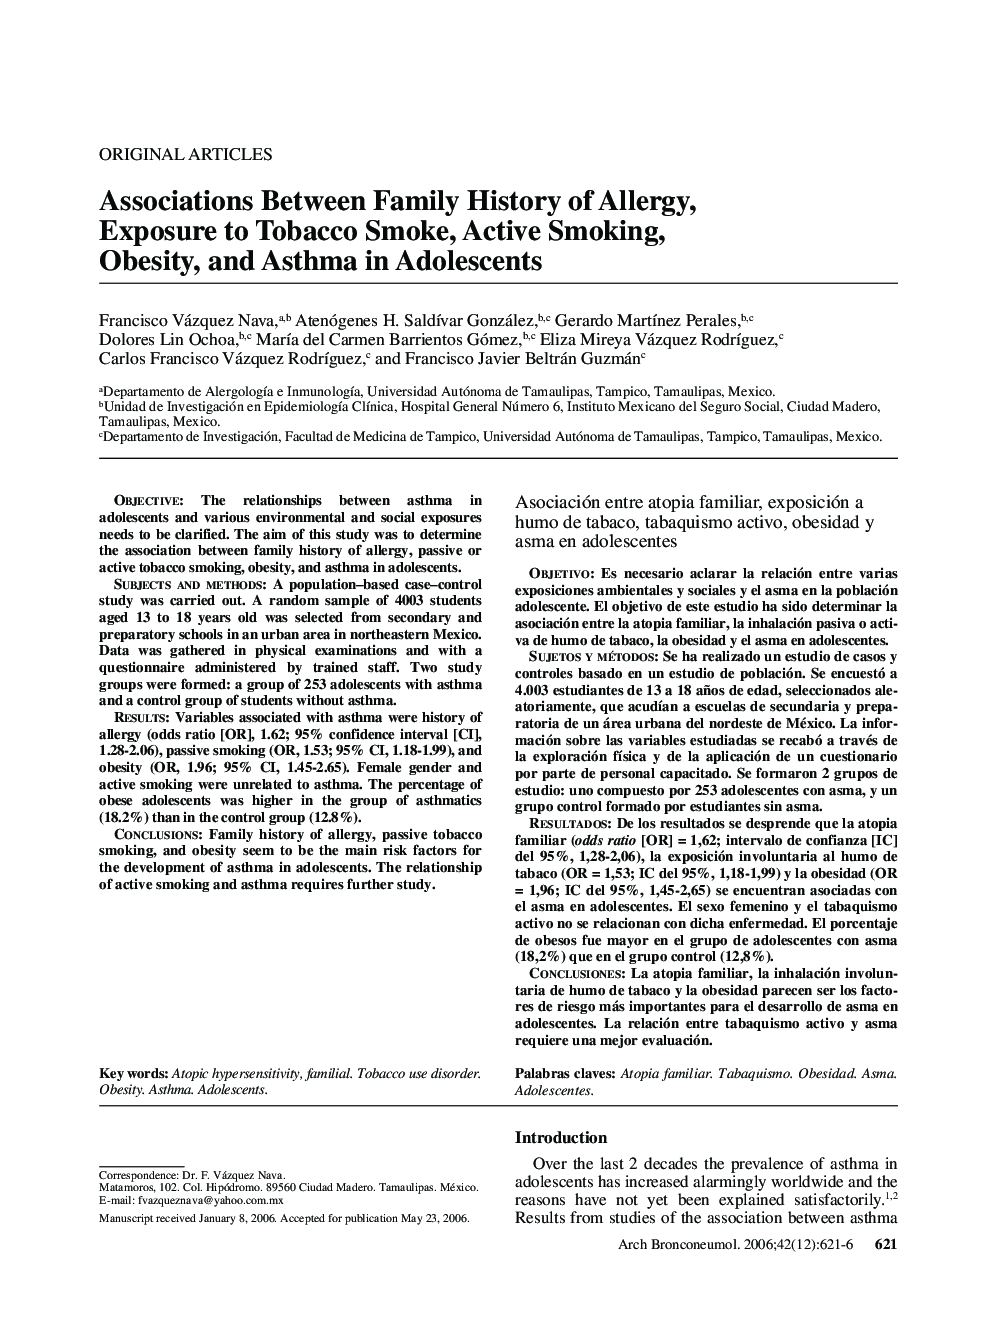 Associations Between Family History of Allergy, Exposure to Tobacco Smoke, Active Smoking, Obesity, and Asthma in Adolescents